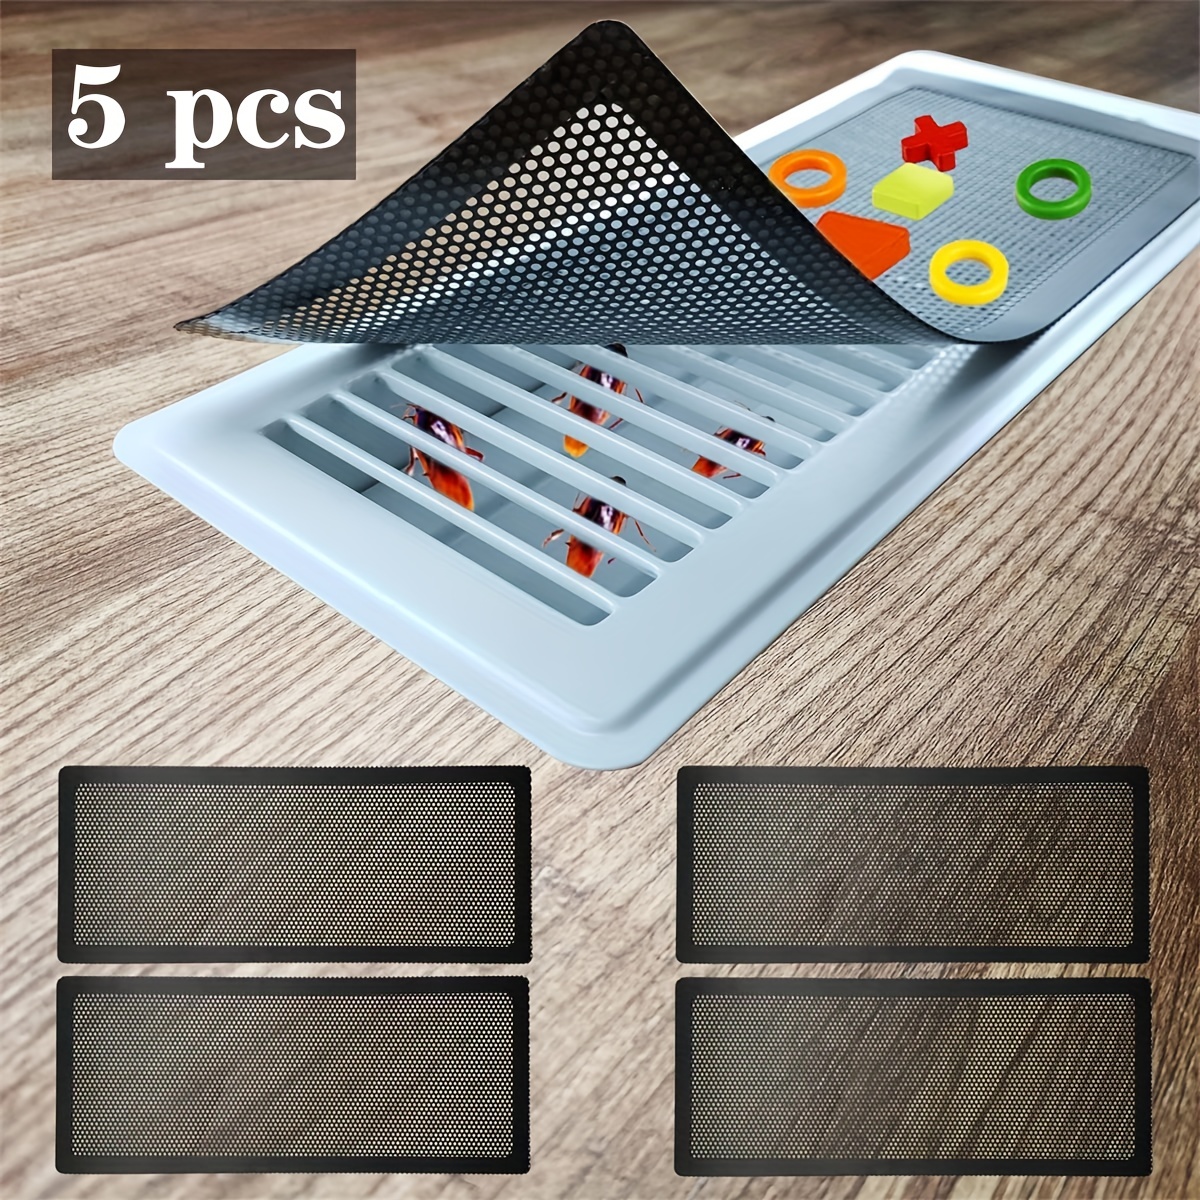 

5pcs Floor Register Trap/vent Mesh, Magnetic Air Vent Screen Cover For Home Floor, Easy Install Vent Bug Mesh Perfect For Wall/ceiling/floor Air Vent Filters (black)